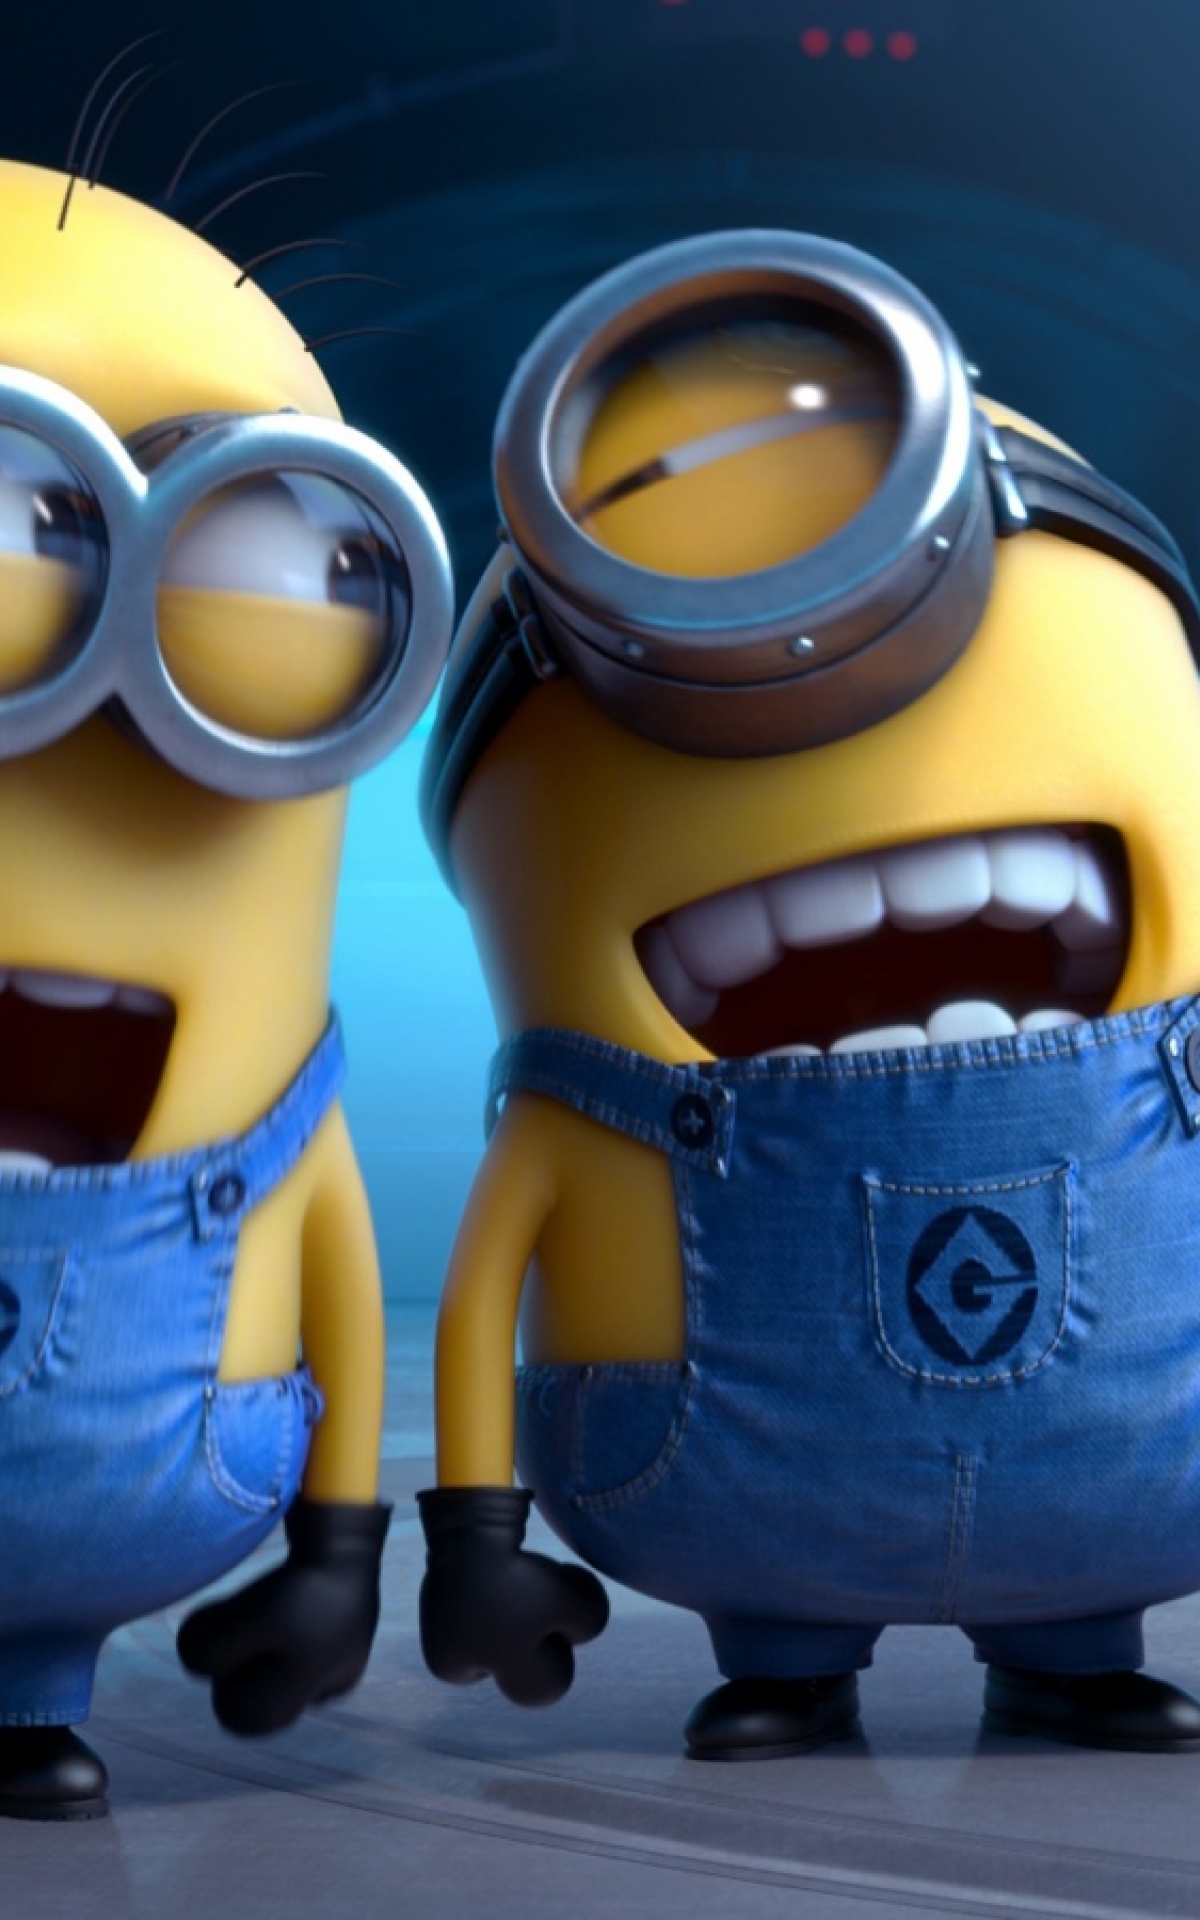 10x19 Minion Laugh Wallpaper Hd 10x19 Resolution Wallpaper Hd Movies 4k Wallpapers Images Photos And Background